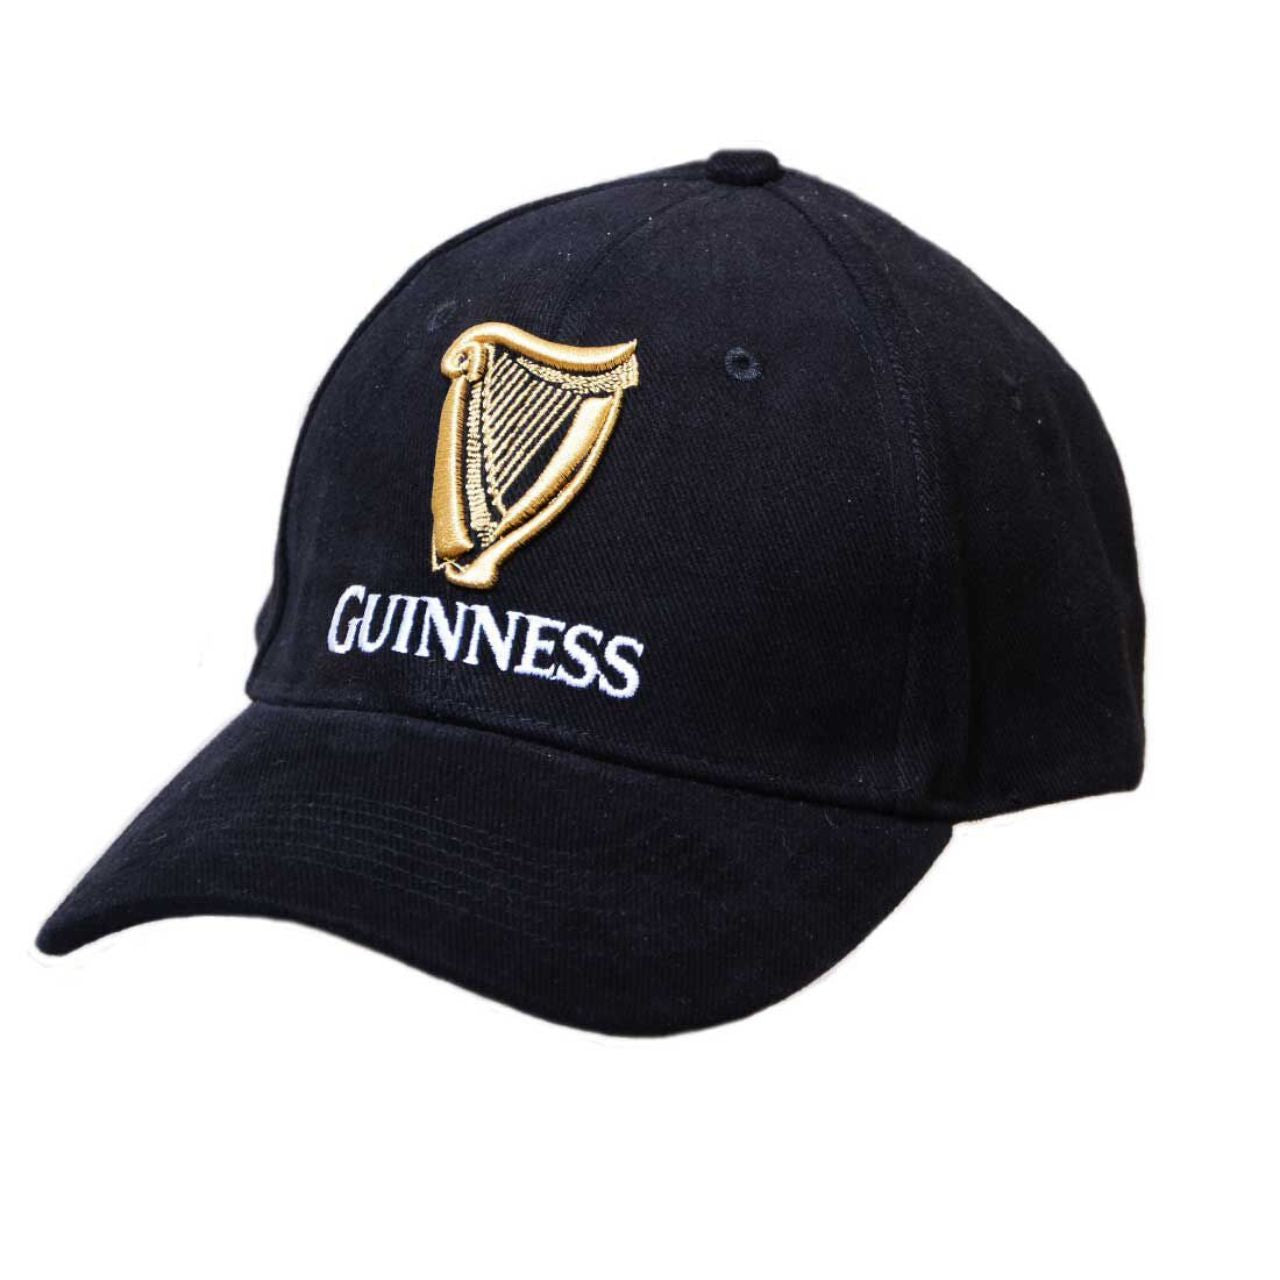 Black Guinness Baseball Cap With Official Logo  - Official Guinness Merchandise - 100% Cotton - One Size - Adjustable Cap - Machine Washable